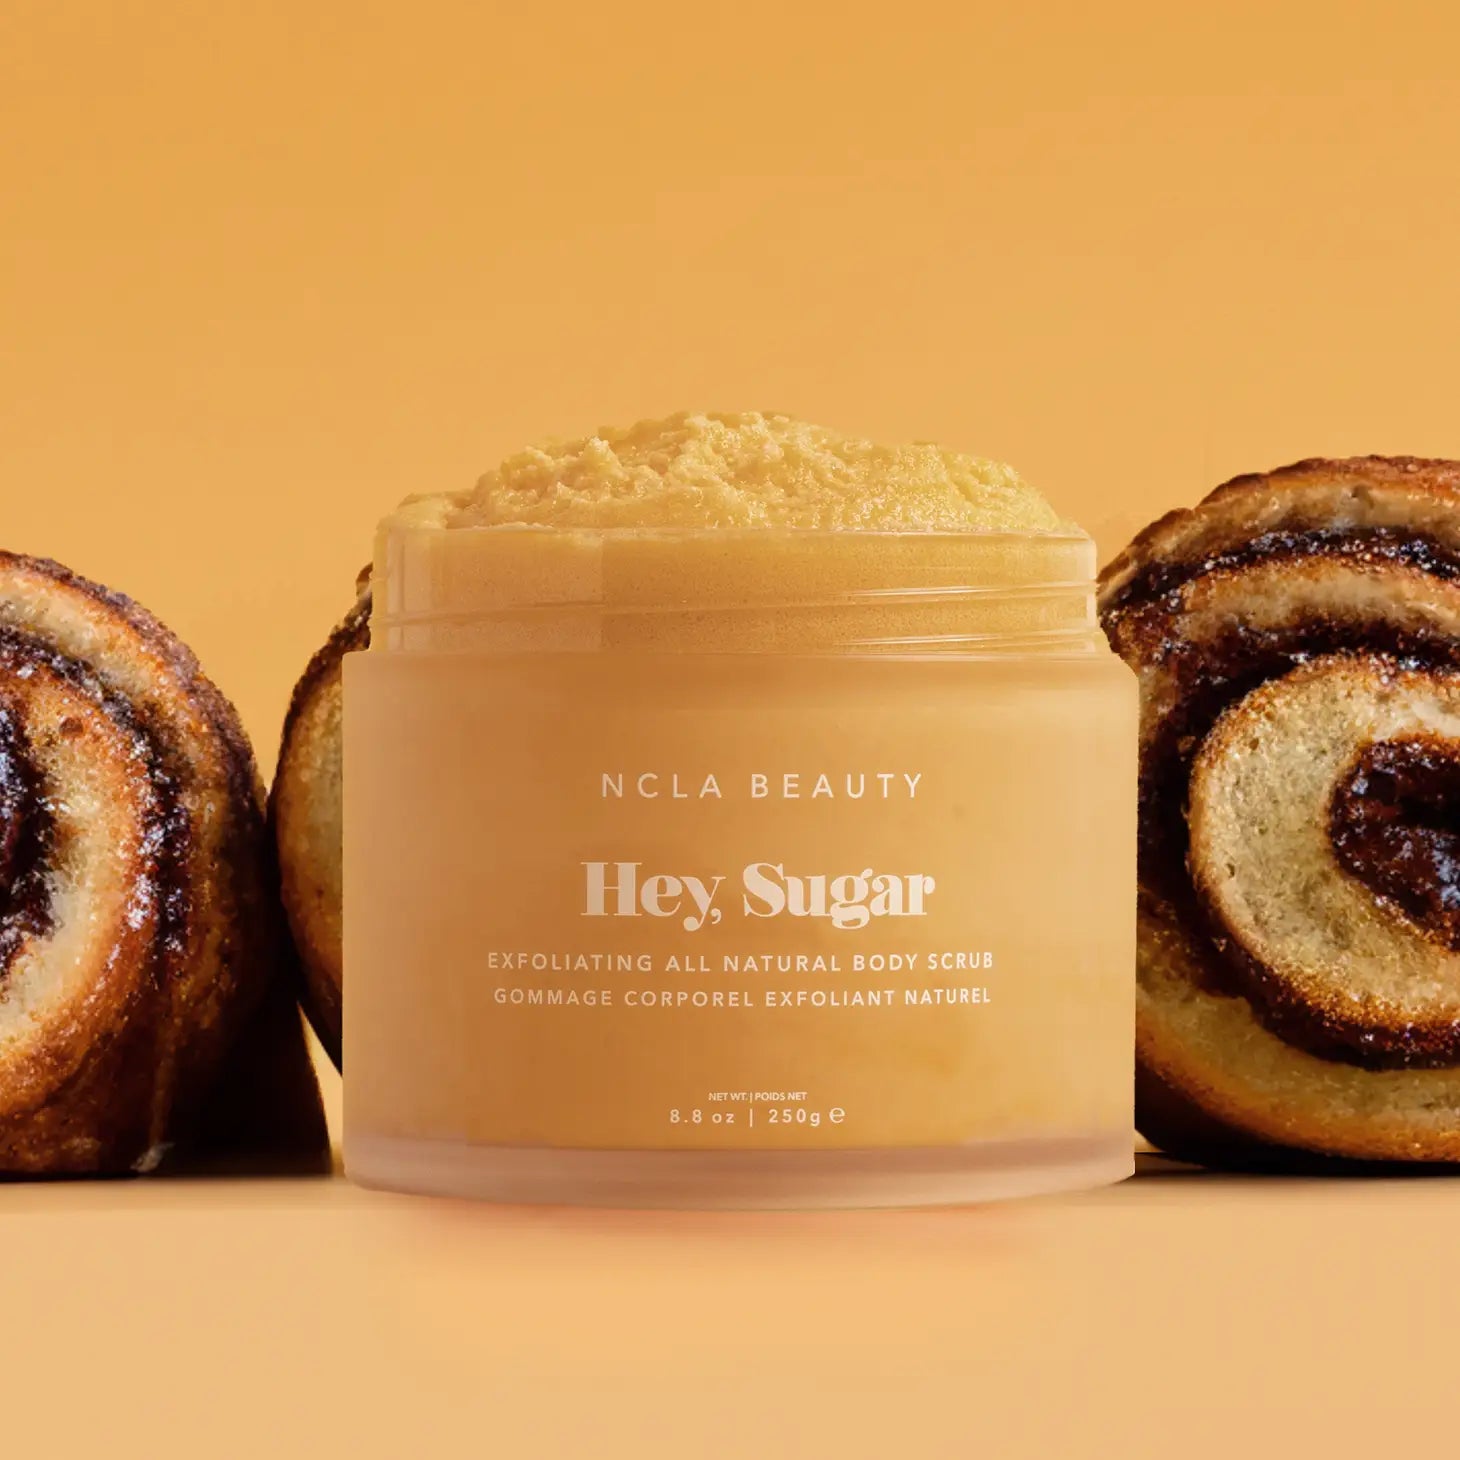 Cinnamon Roll Body Scrub sits in front of row of cinnamon rolls on brown background.